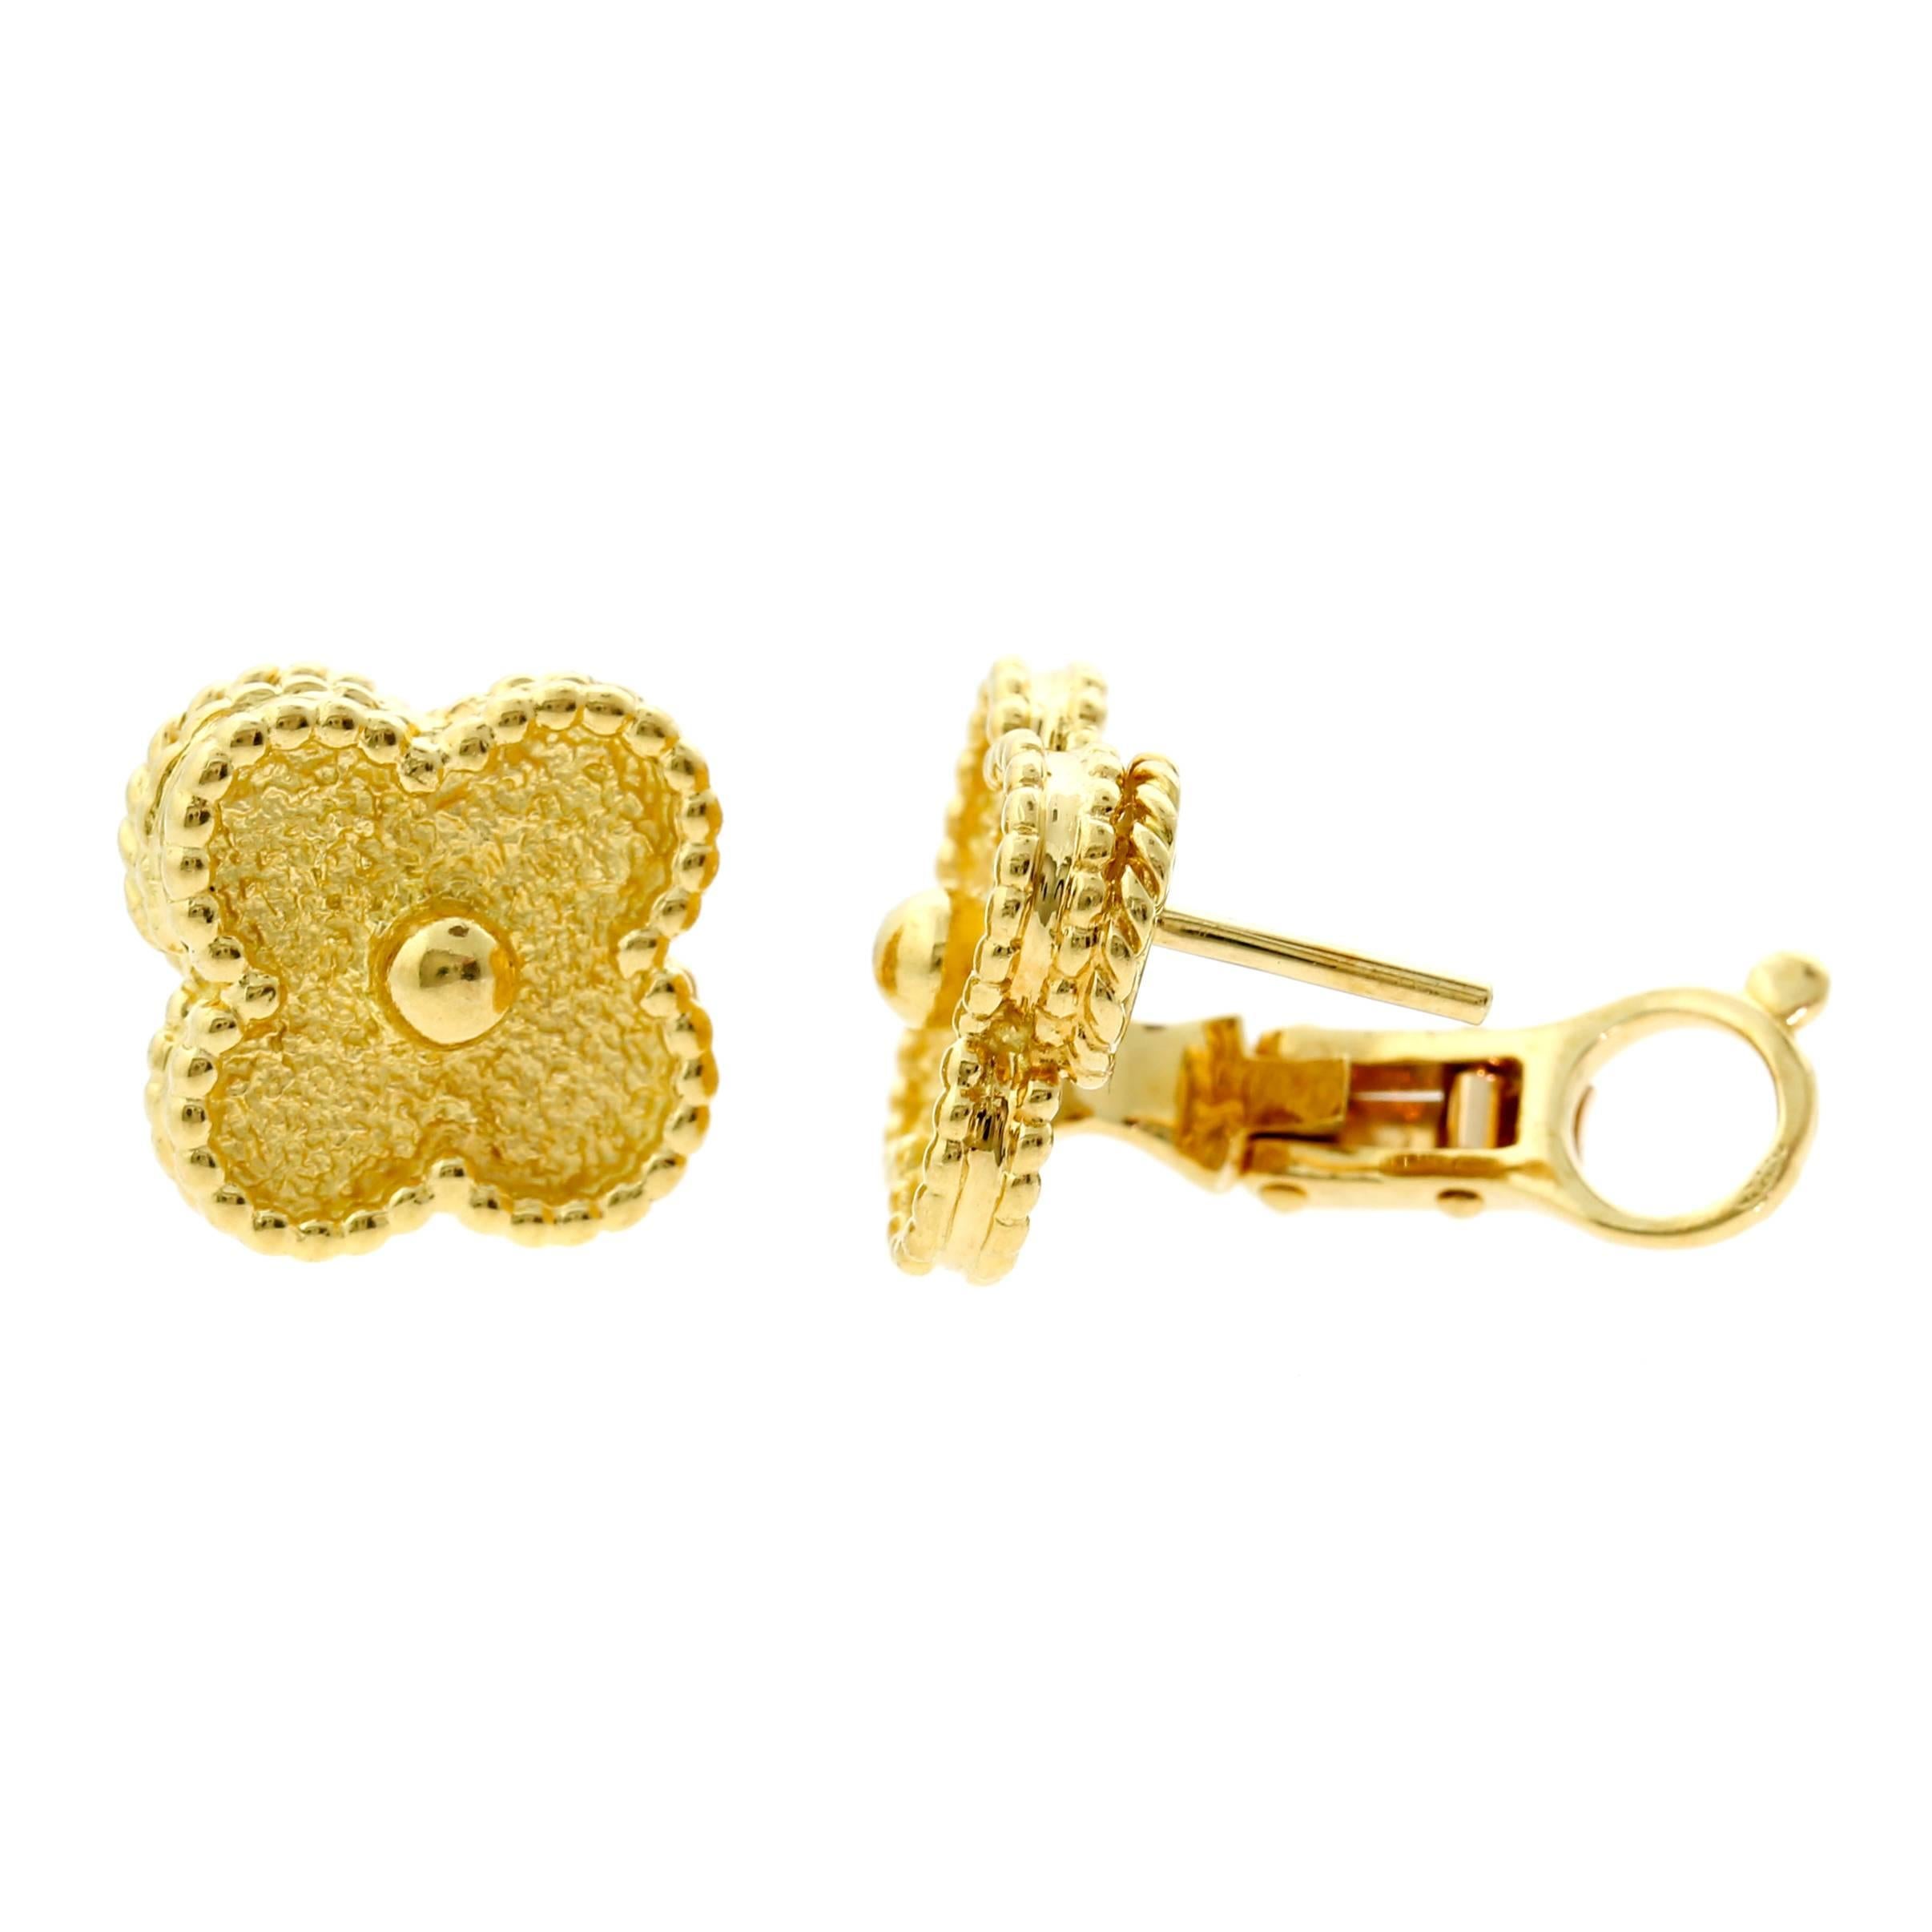 A chic pair of authentic 18k yellow gold Van Cleef & Arpels Vintage Alhambra earclips accompanied with the paperwork.

The earrings measure .59